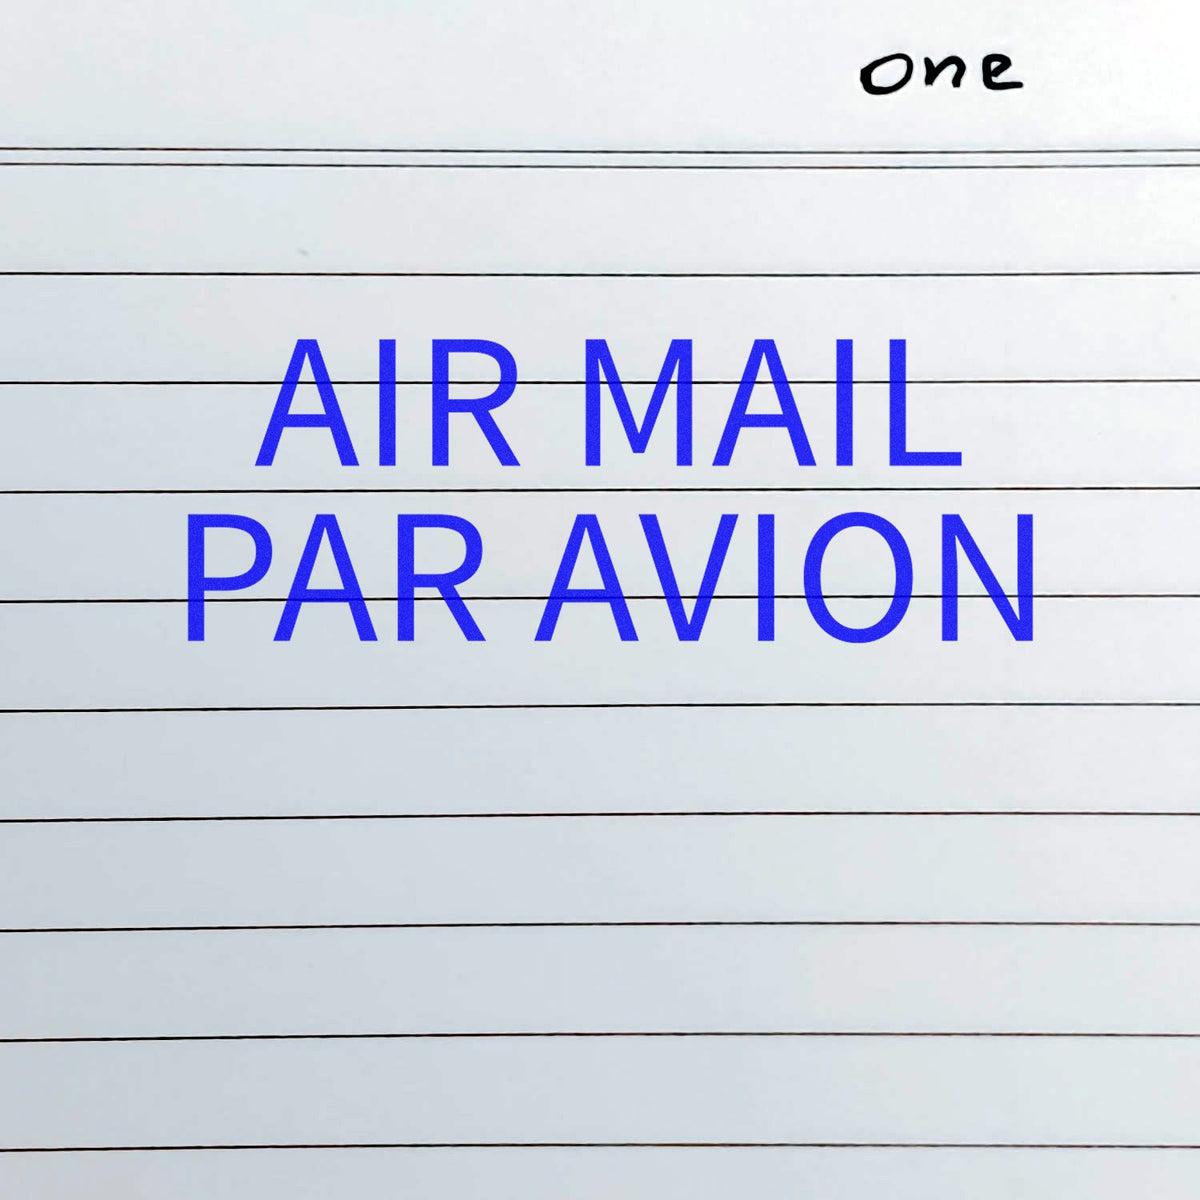 Large Pre-Inked Air Mail Par Avion Stamp In Use Photo